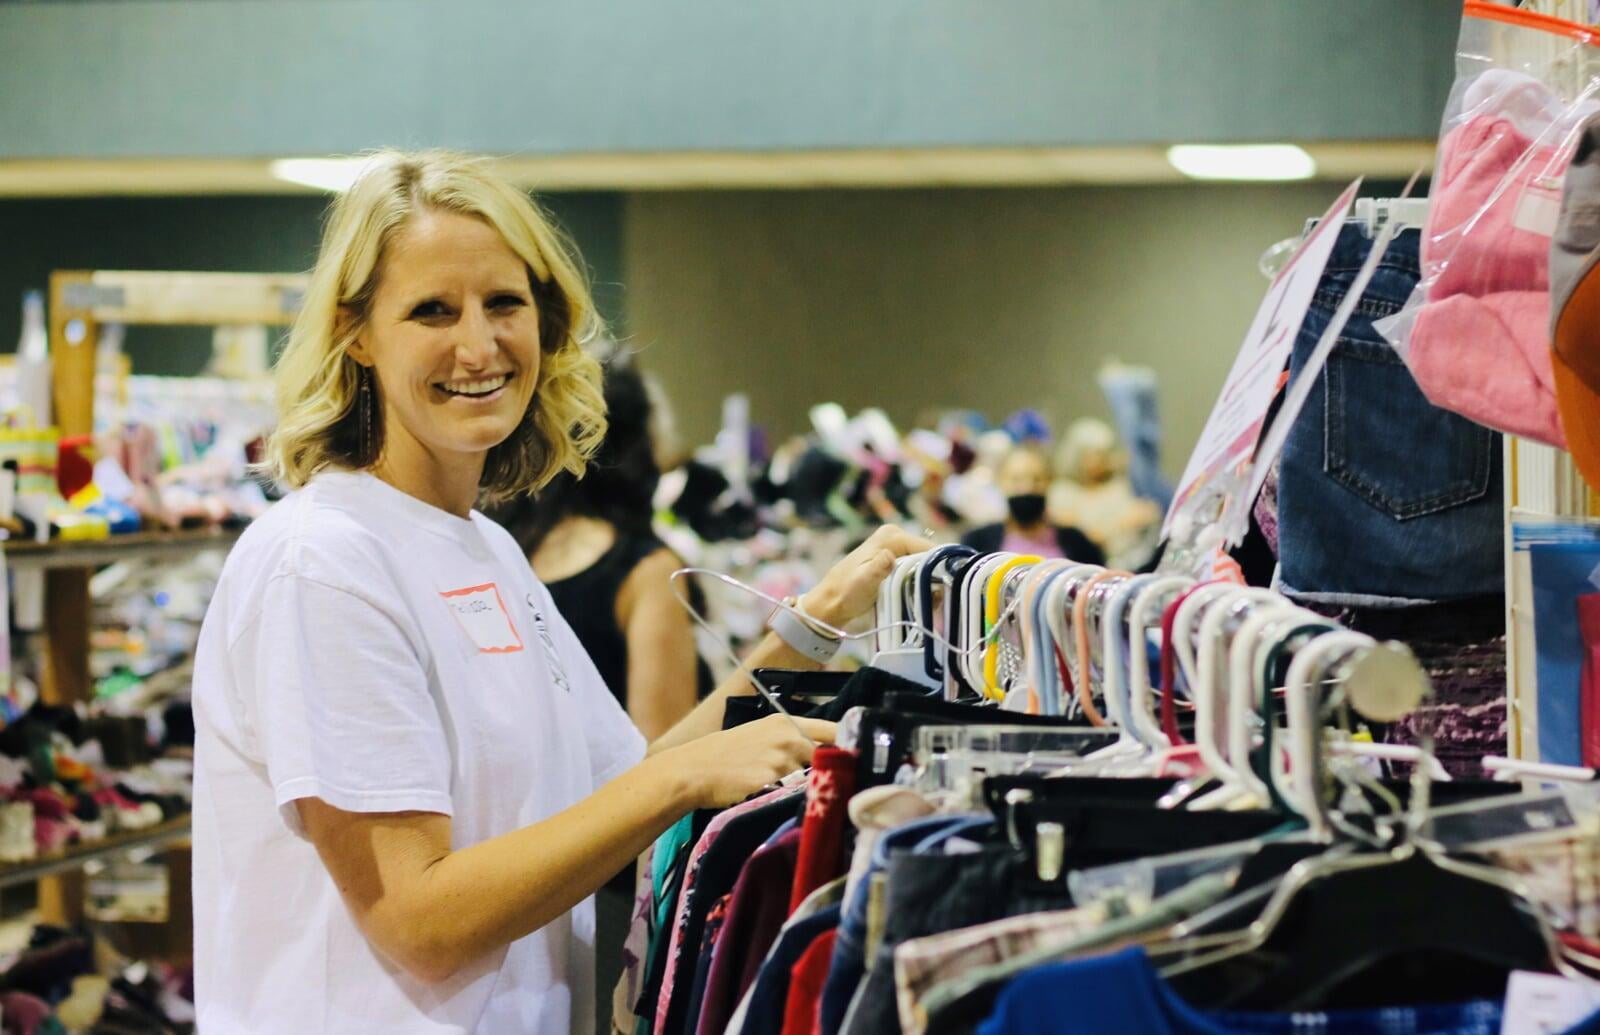 A smiling Team Member stands behind a rack of toddler girl's clothing at the sale.